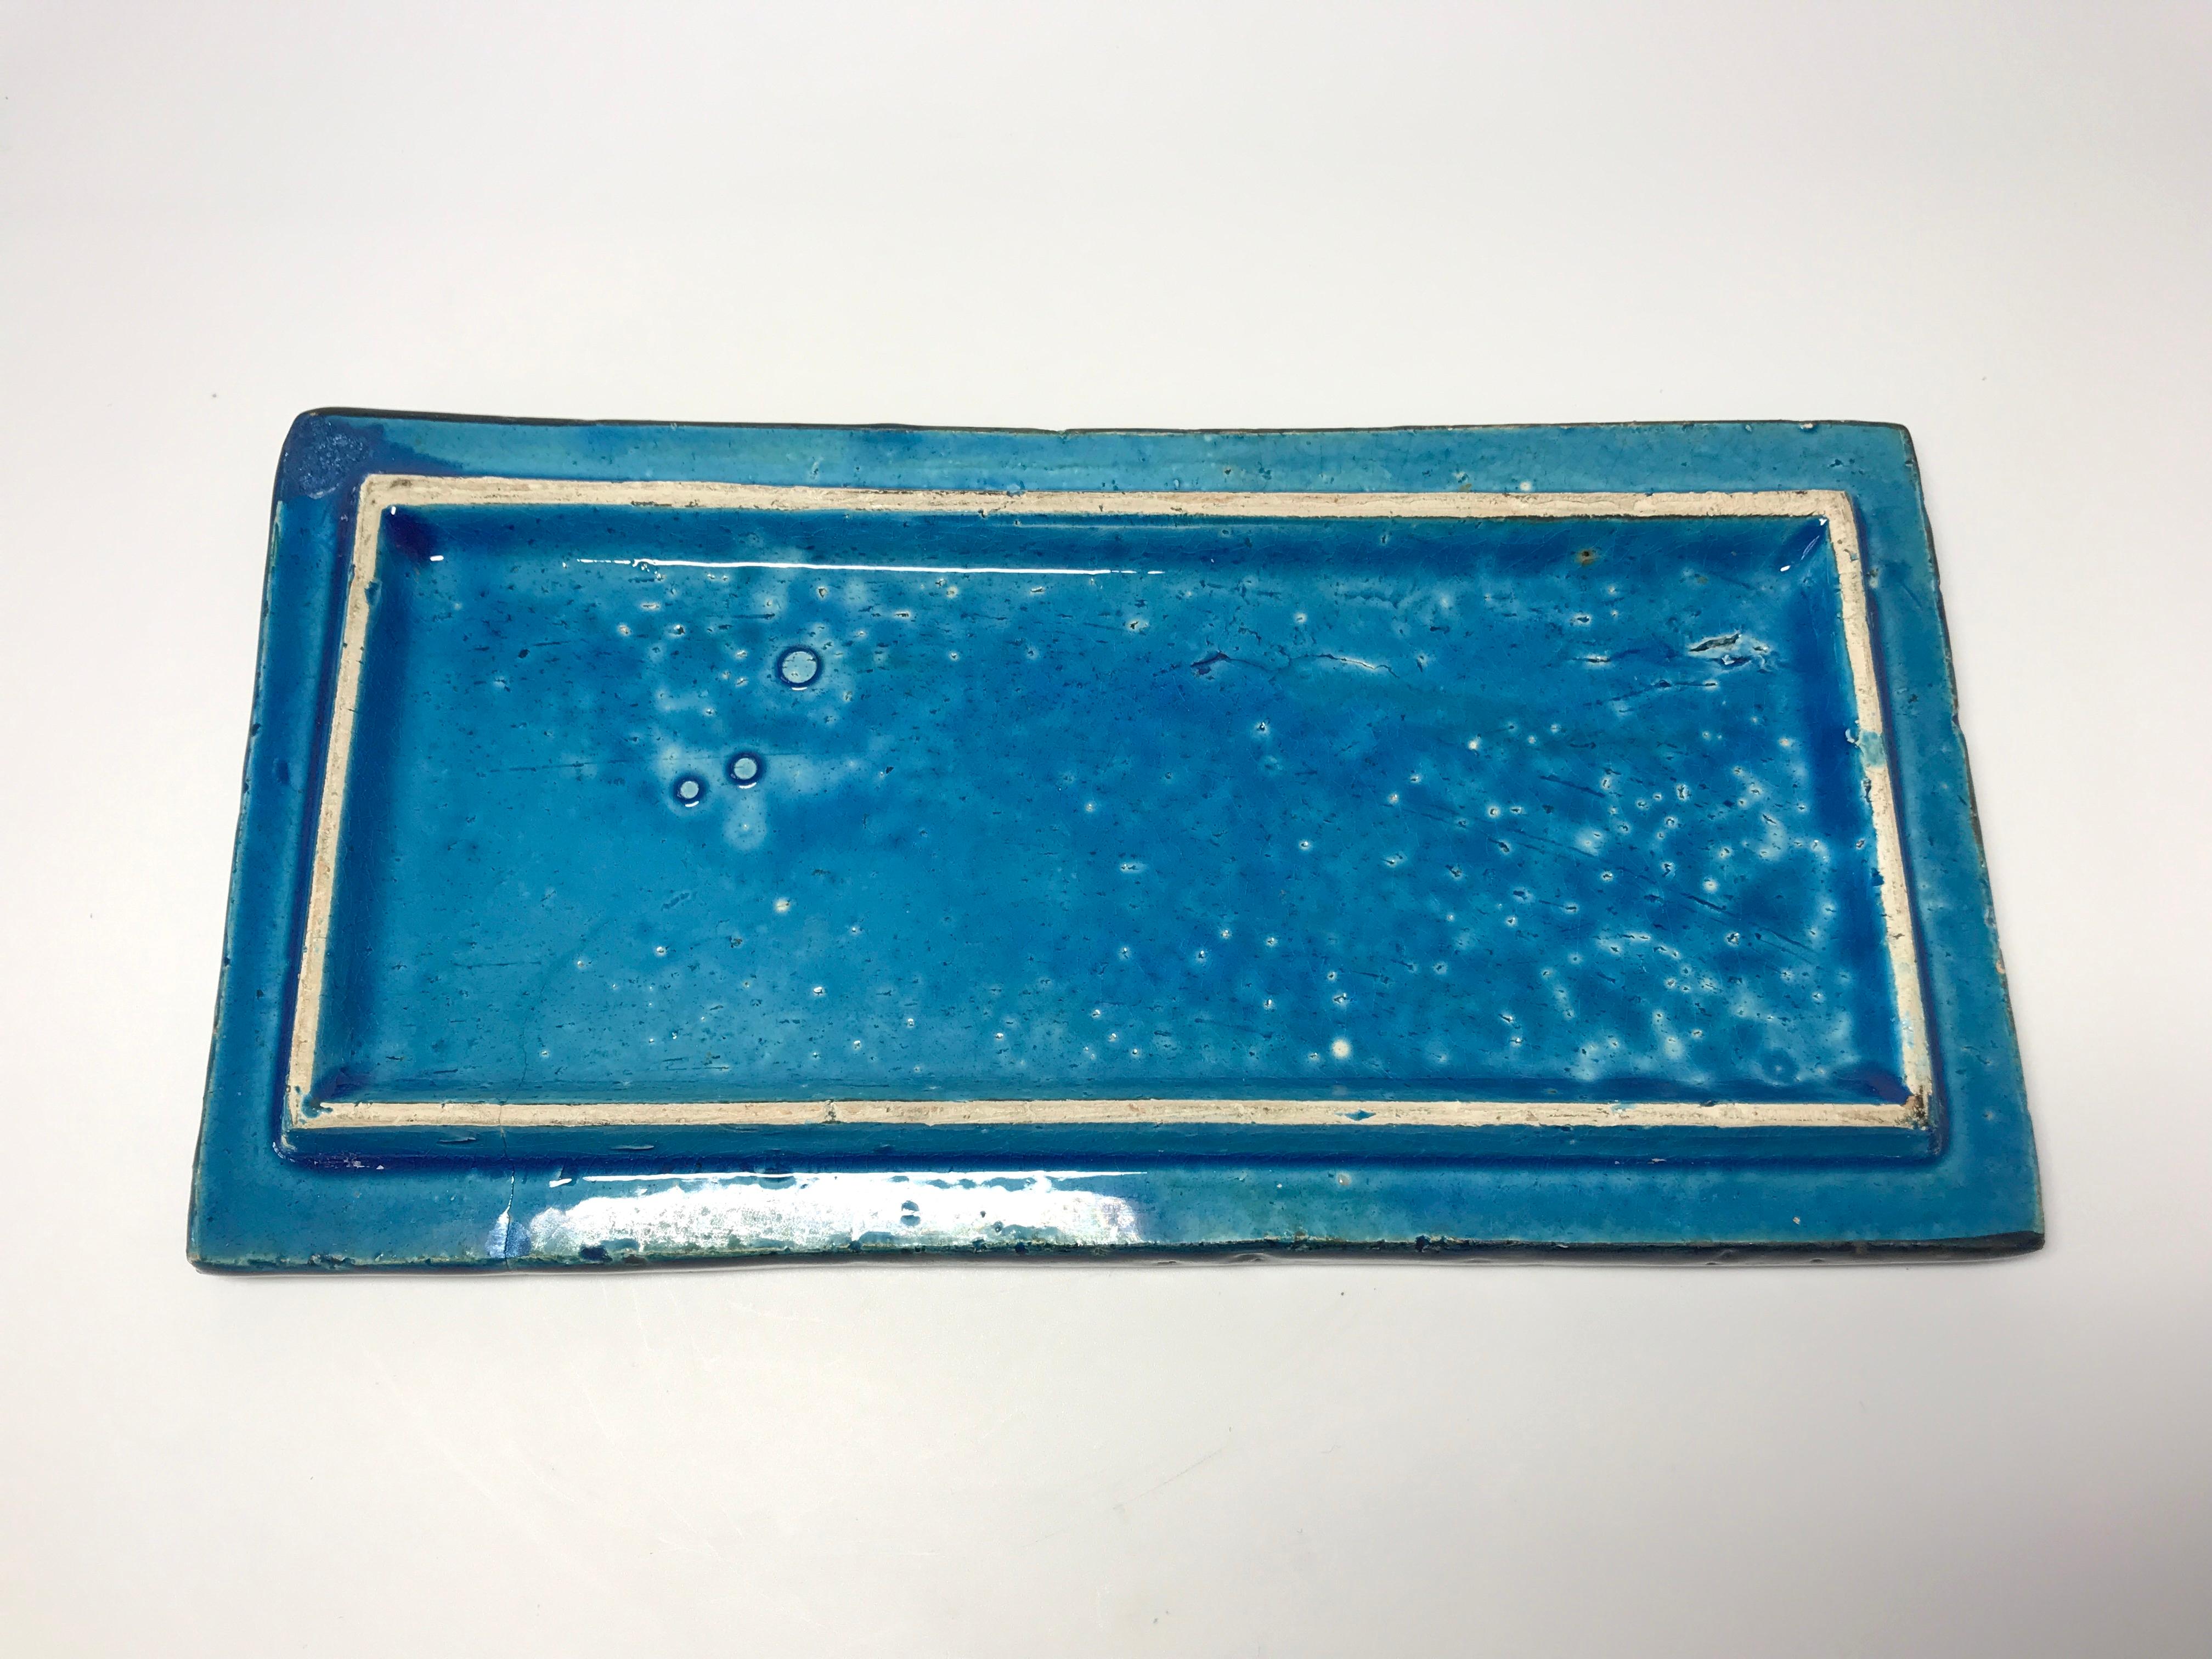 Rimini Blue and Green Bitossi Studio of Italy, 1960s Oblong Ceramic Lidded Box In Good Condition For Sale In Rothley, Leicestershire